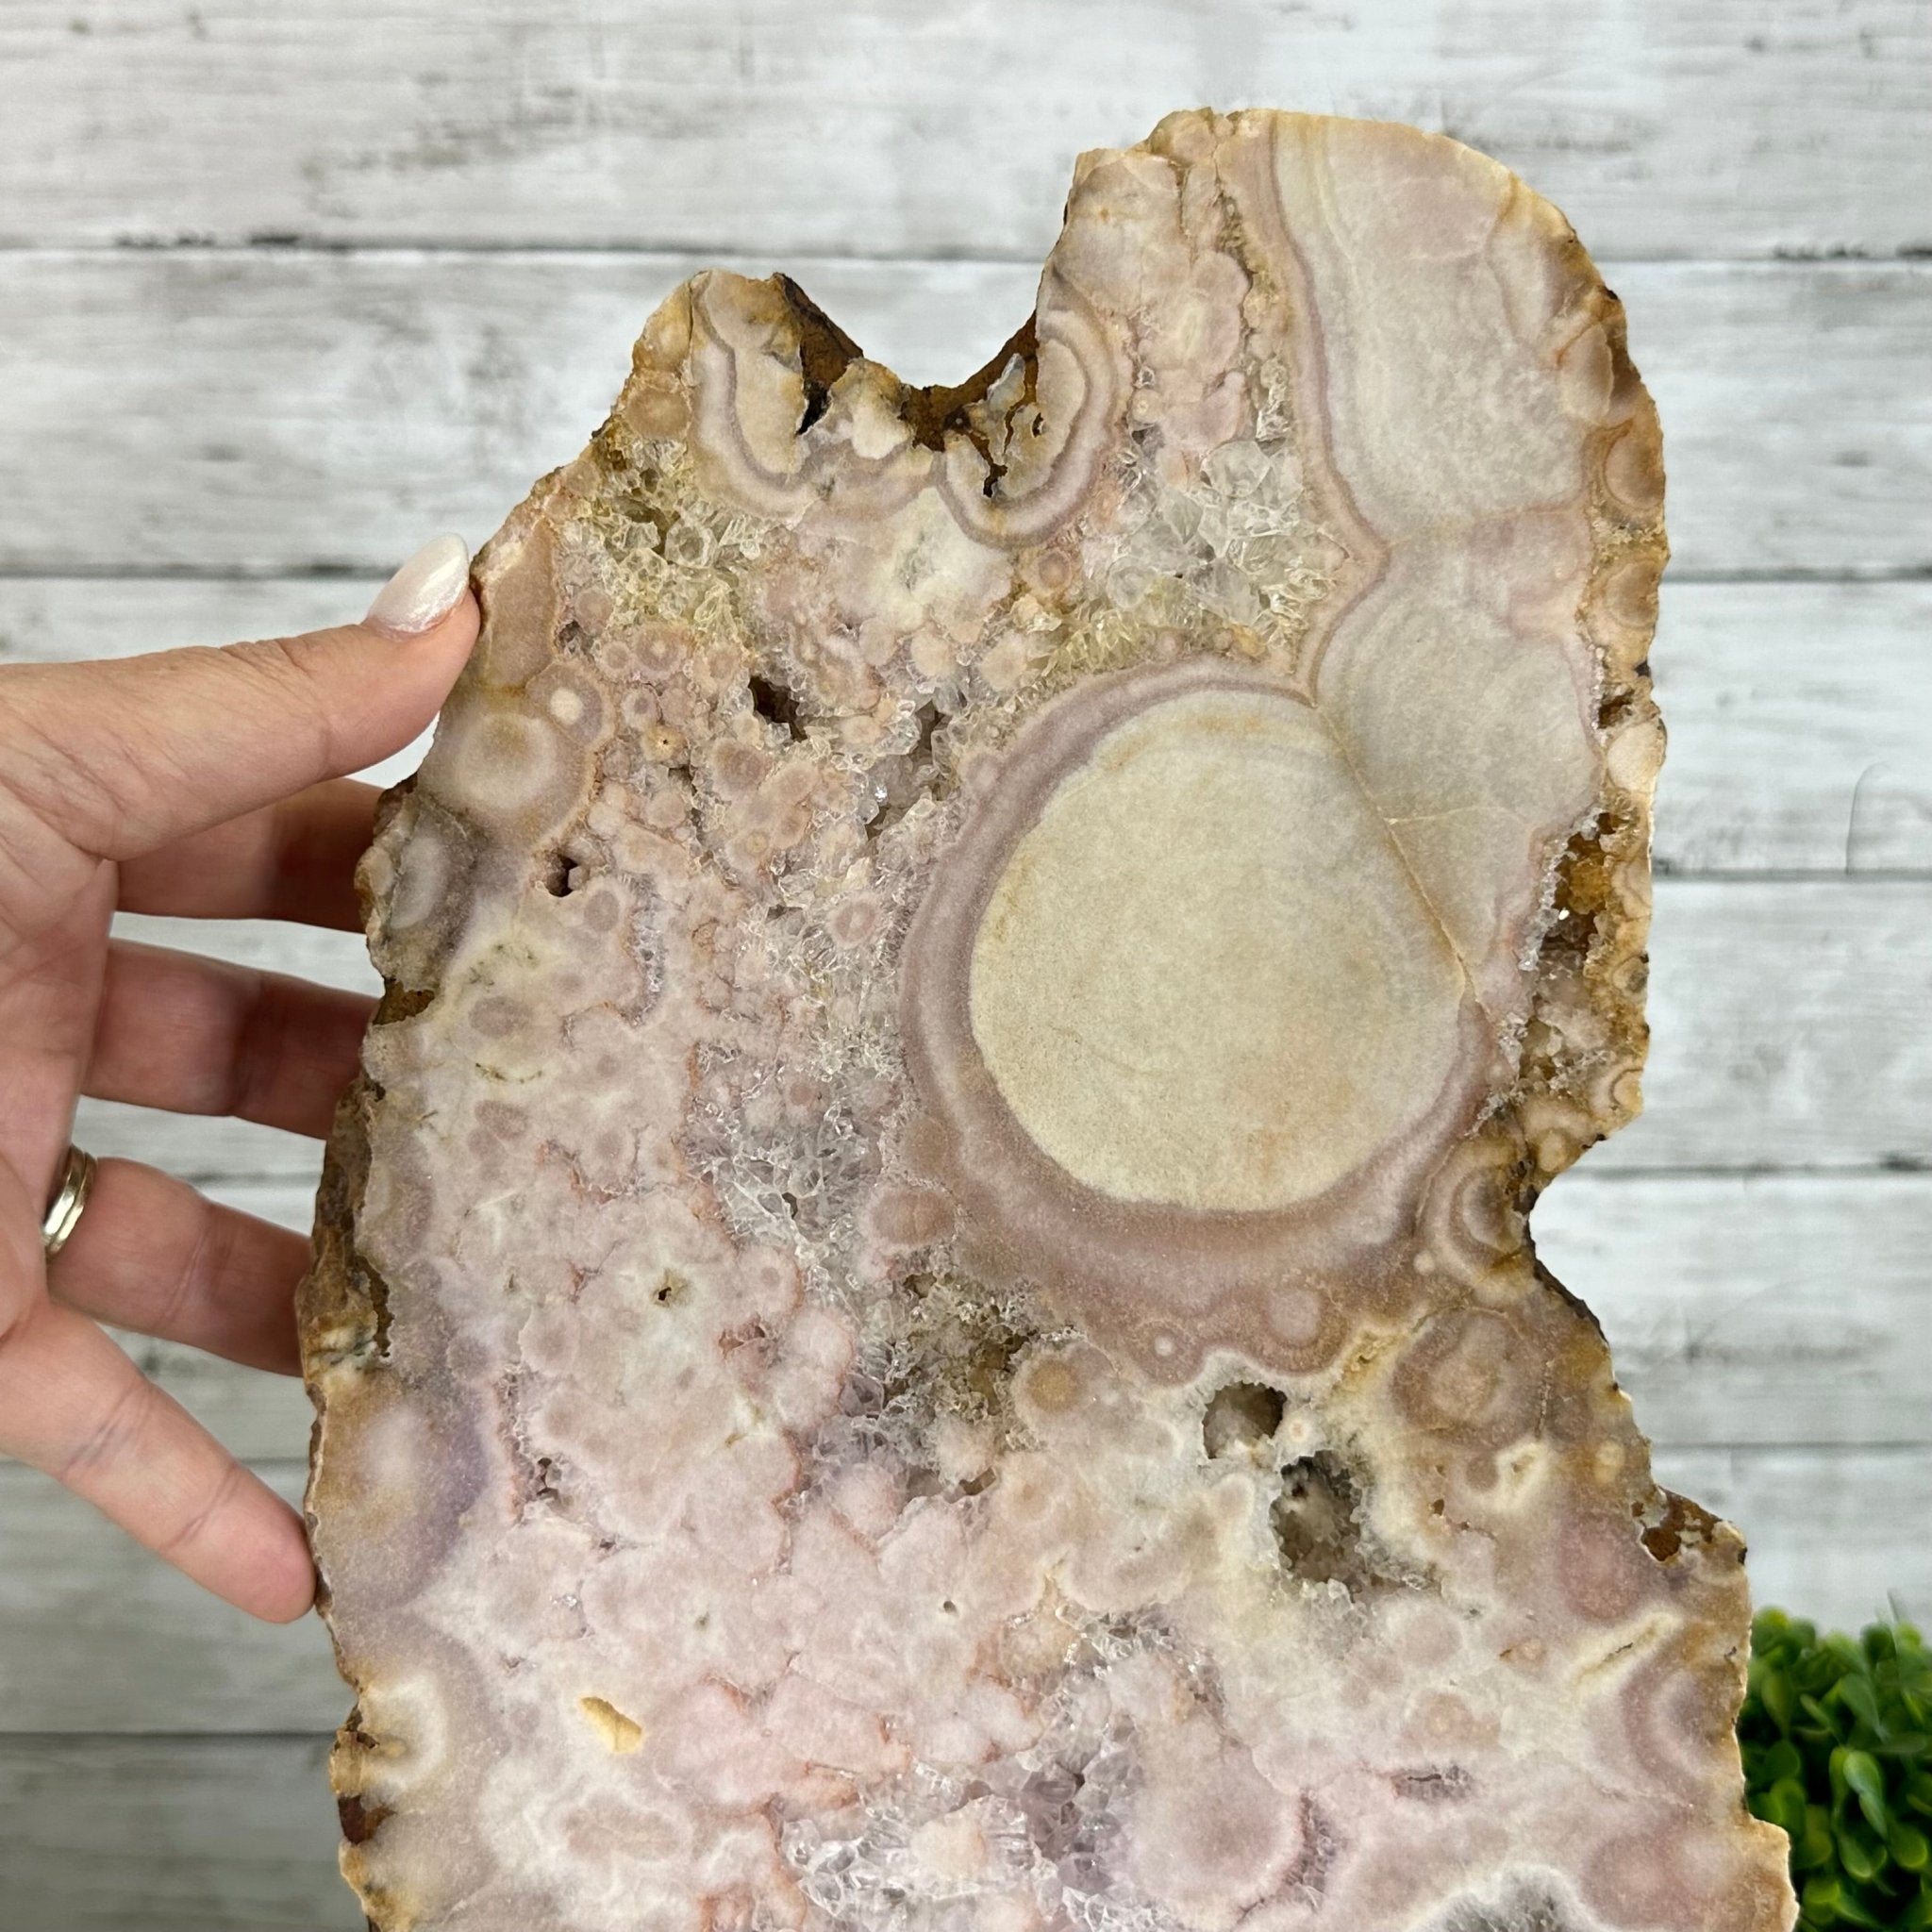 Polished Pink Amethyst Slice on a Stand, 7 lbs & 16.4" Tall #5743-0030 - Brazil GemsBrazil GemsPolished Pink Amethyst Slice on a Stand, 7 lbs & 16.4" Tall #5743-0030Slices on Fixed Bases5743-0030